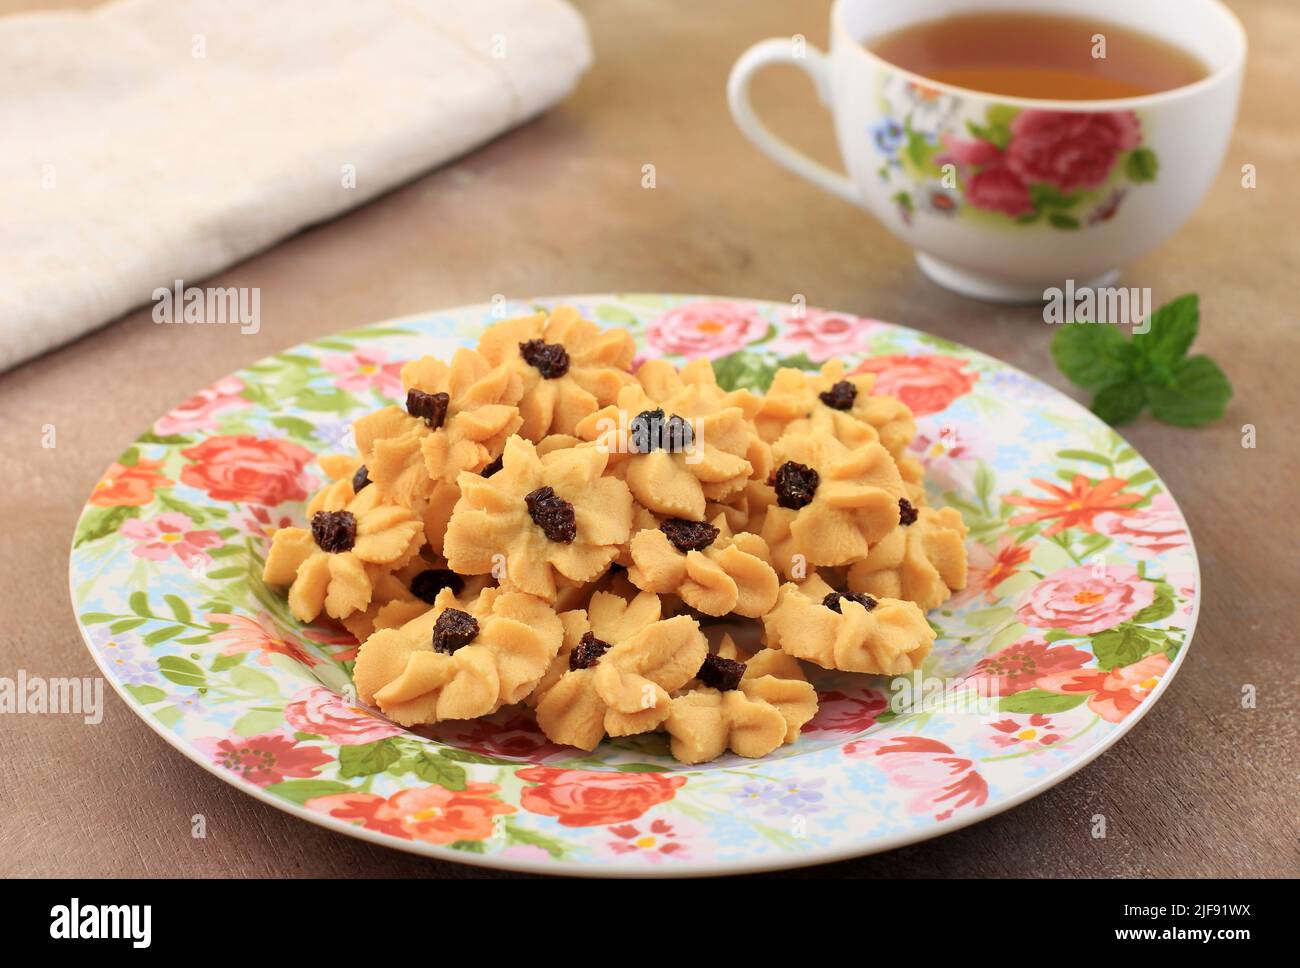 Kue Semprit, Indonesian Traditional Cookies Served to Celebrate Lebaran Idul Fitri Ied Mubarak. Made from Butter, Flour, Egg, with Flower Shape Stock Photo